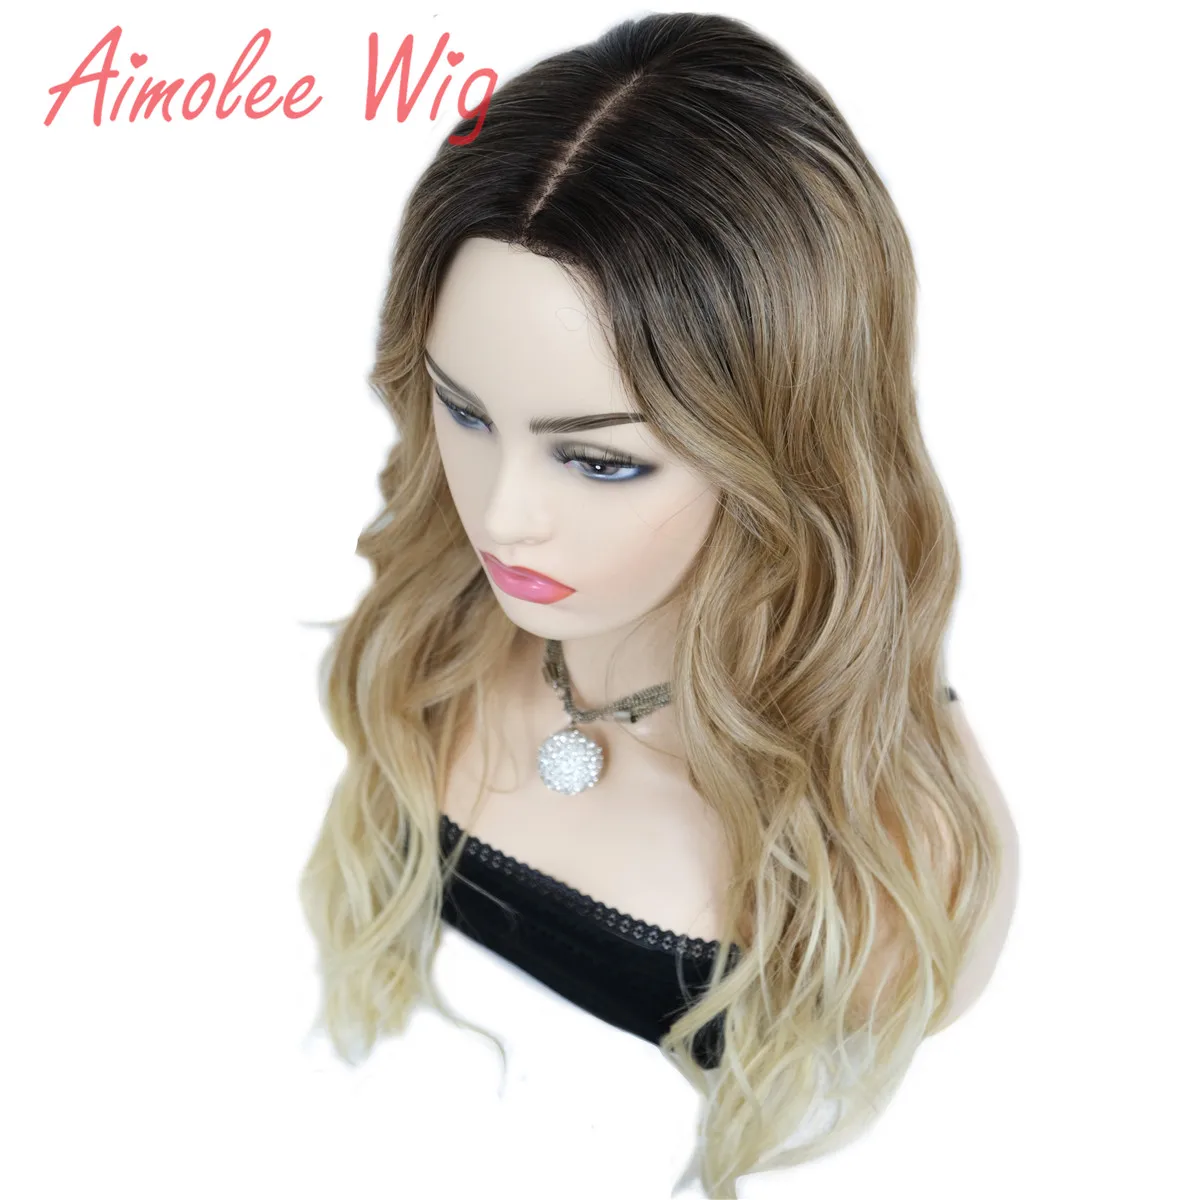 Aimolee Women's Ombre Wigs Hair Brown/Blonde Synthetic Natural Long Curly Part lace Wig For Women